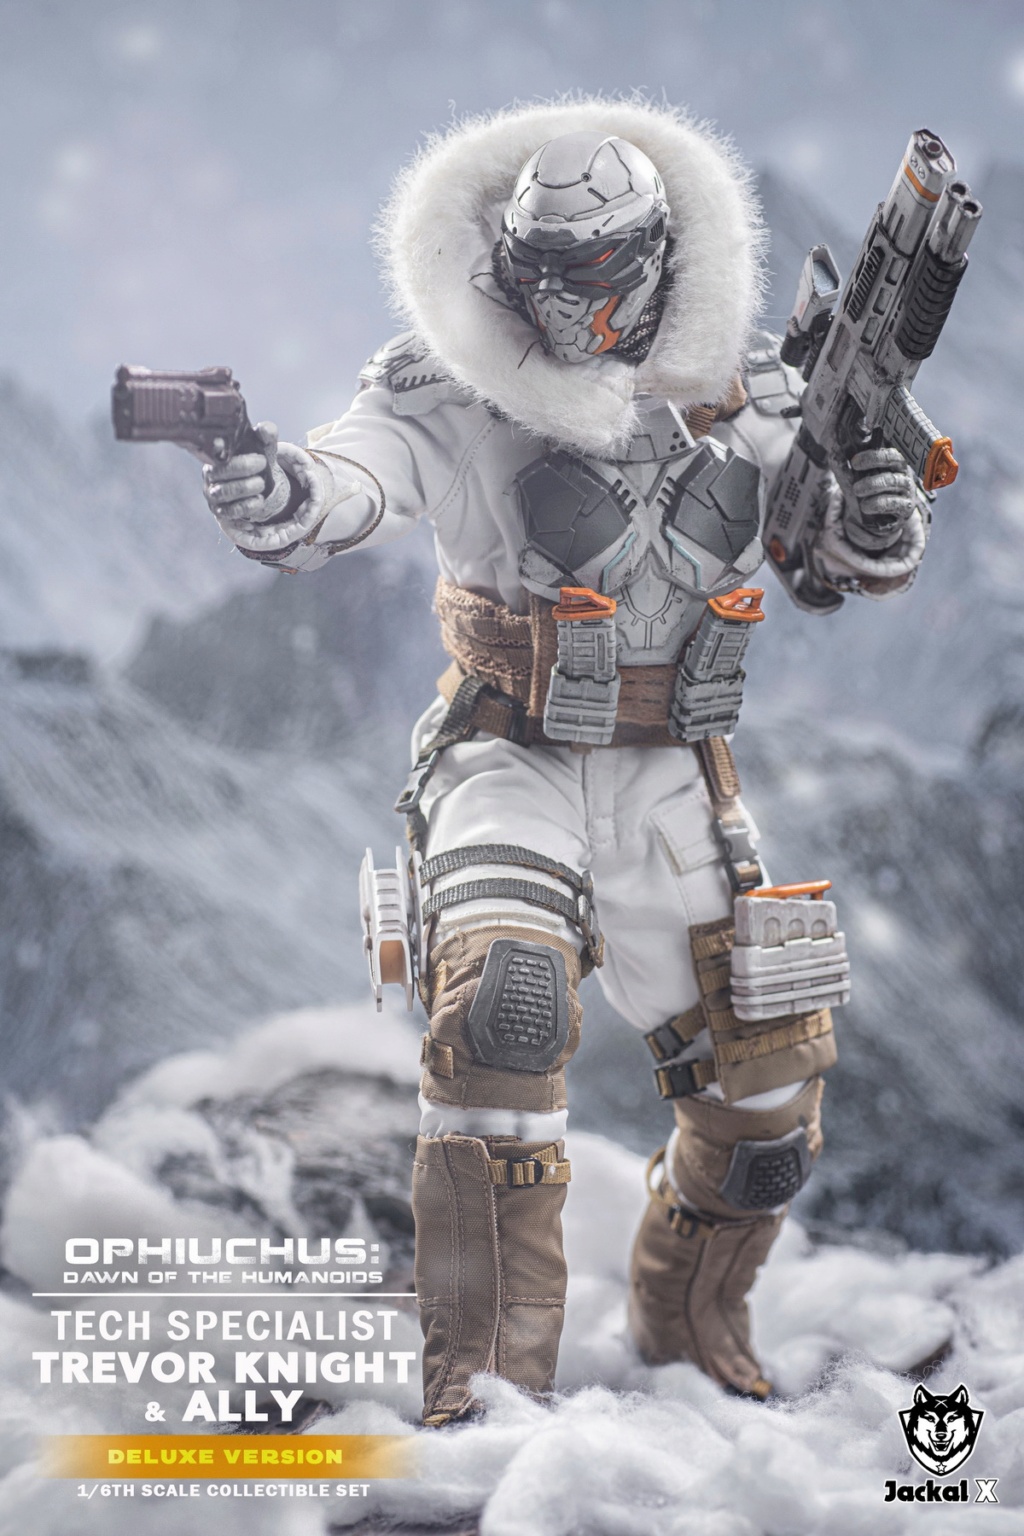 TrevorKnight - NEW PRODUCT: JackalX: JX014 1/6 Scale Tech Specialist Trevor Knight & Ally action figures 17065711